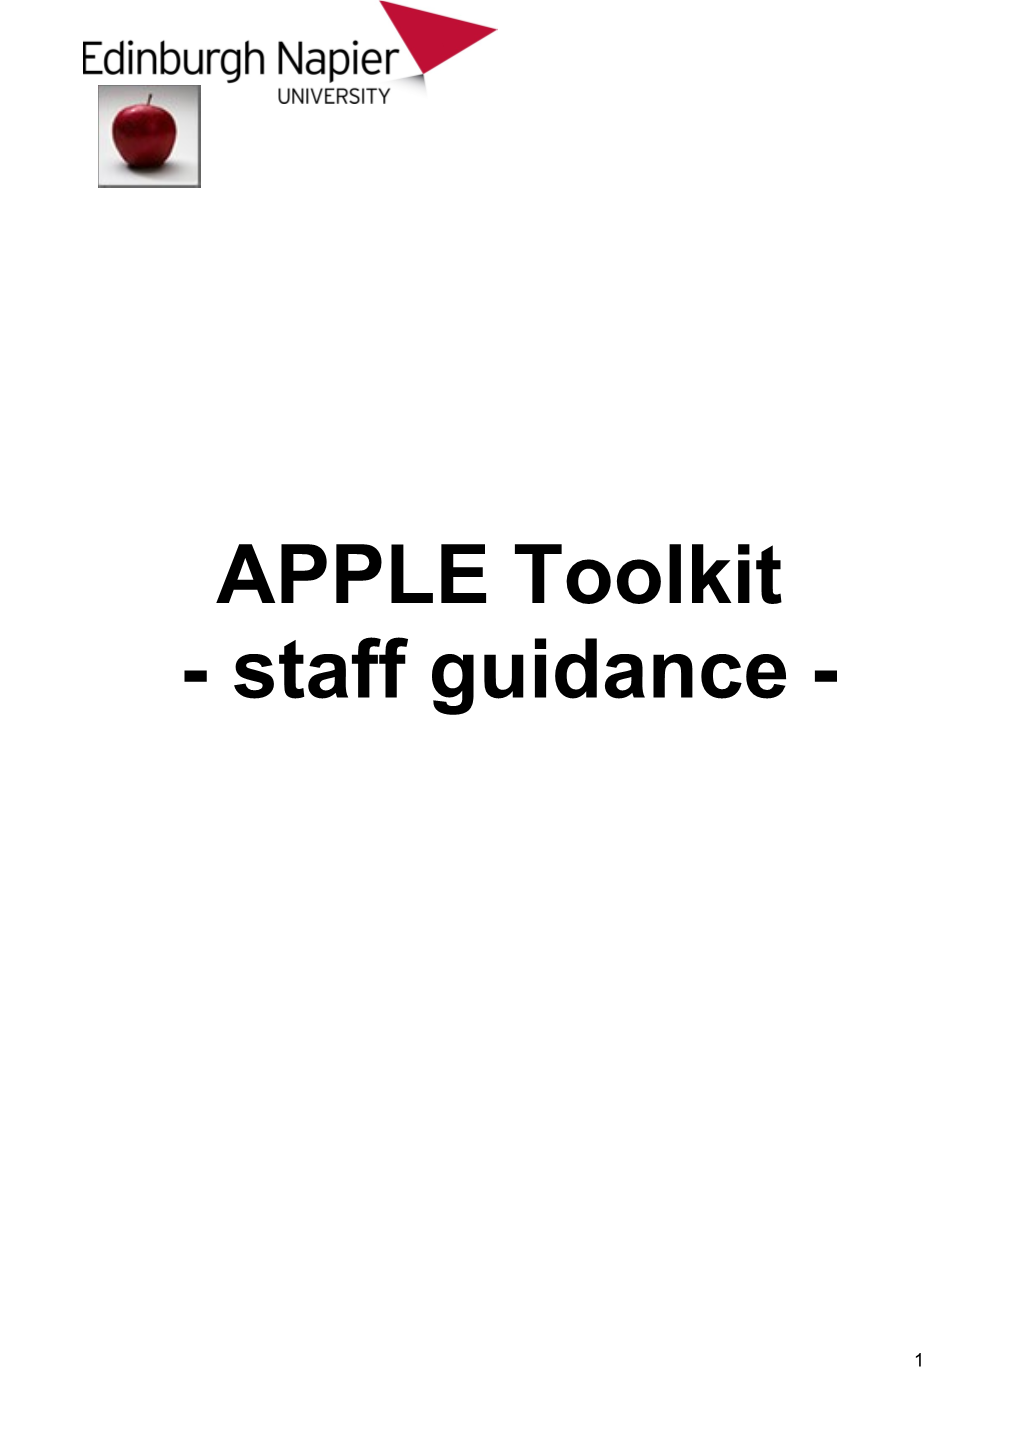 APPLE Toolkit Guidance for Staff